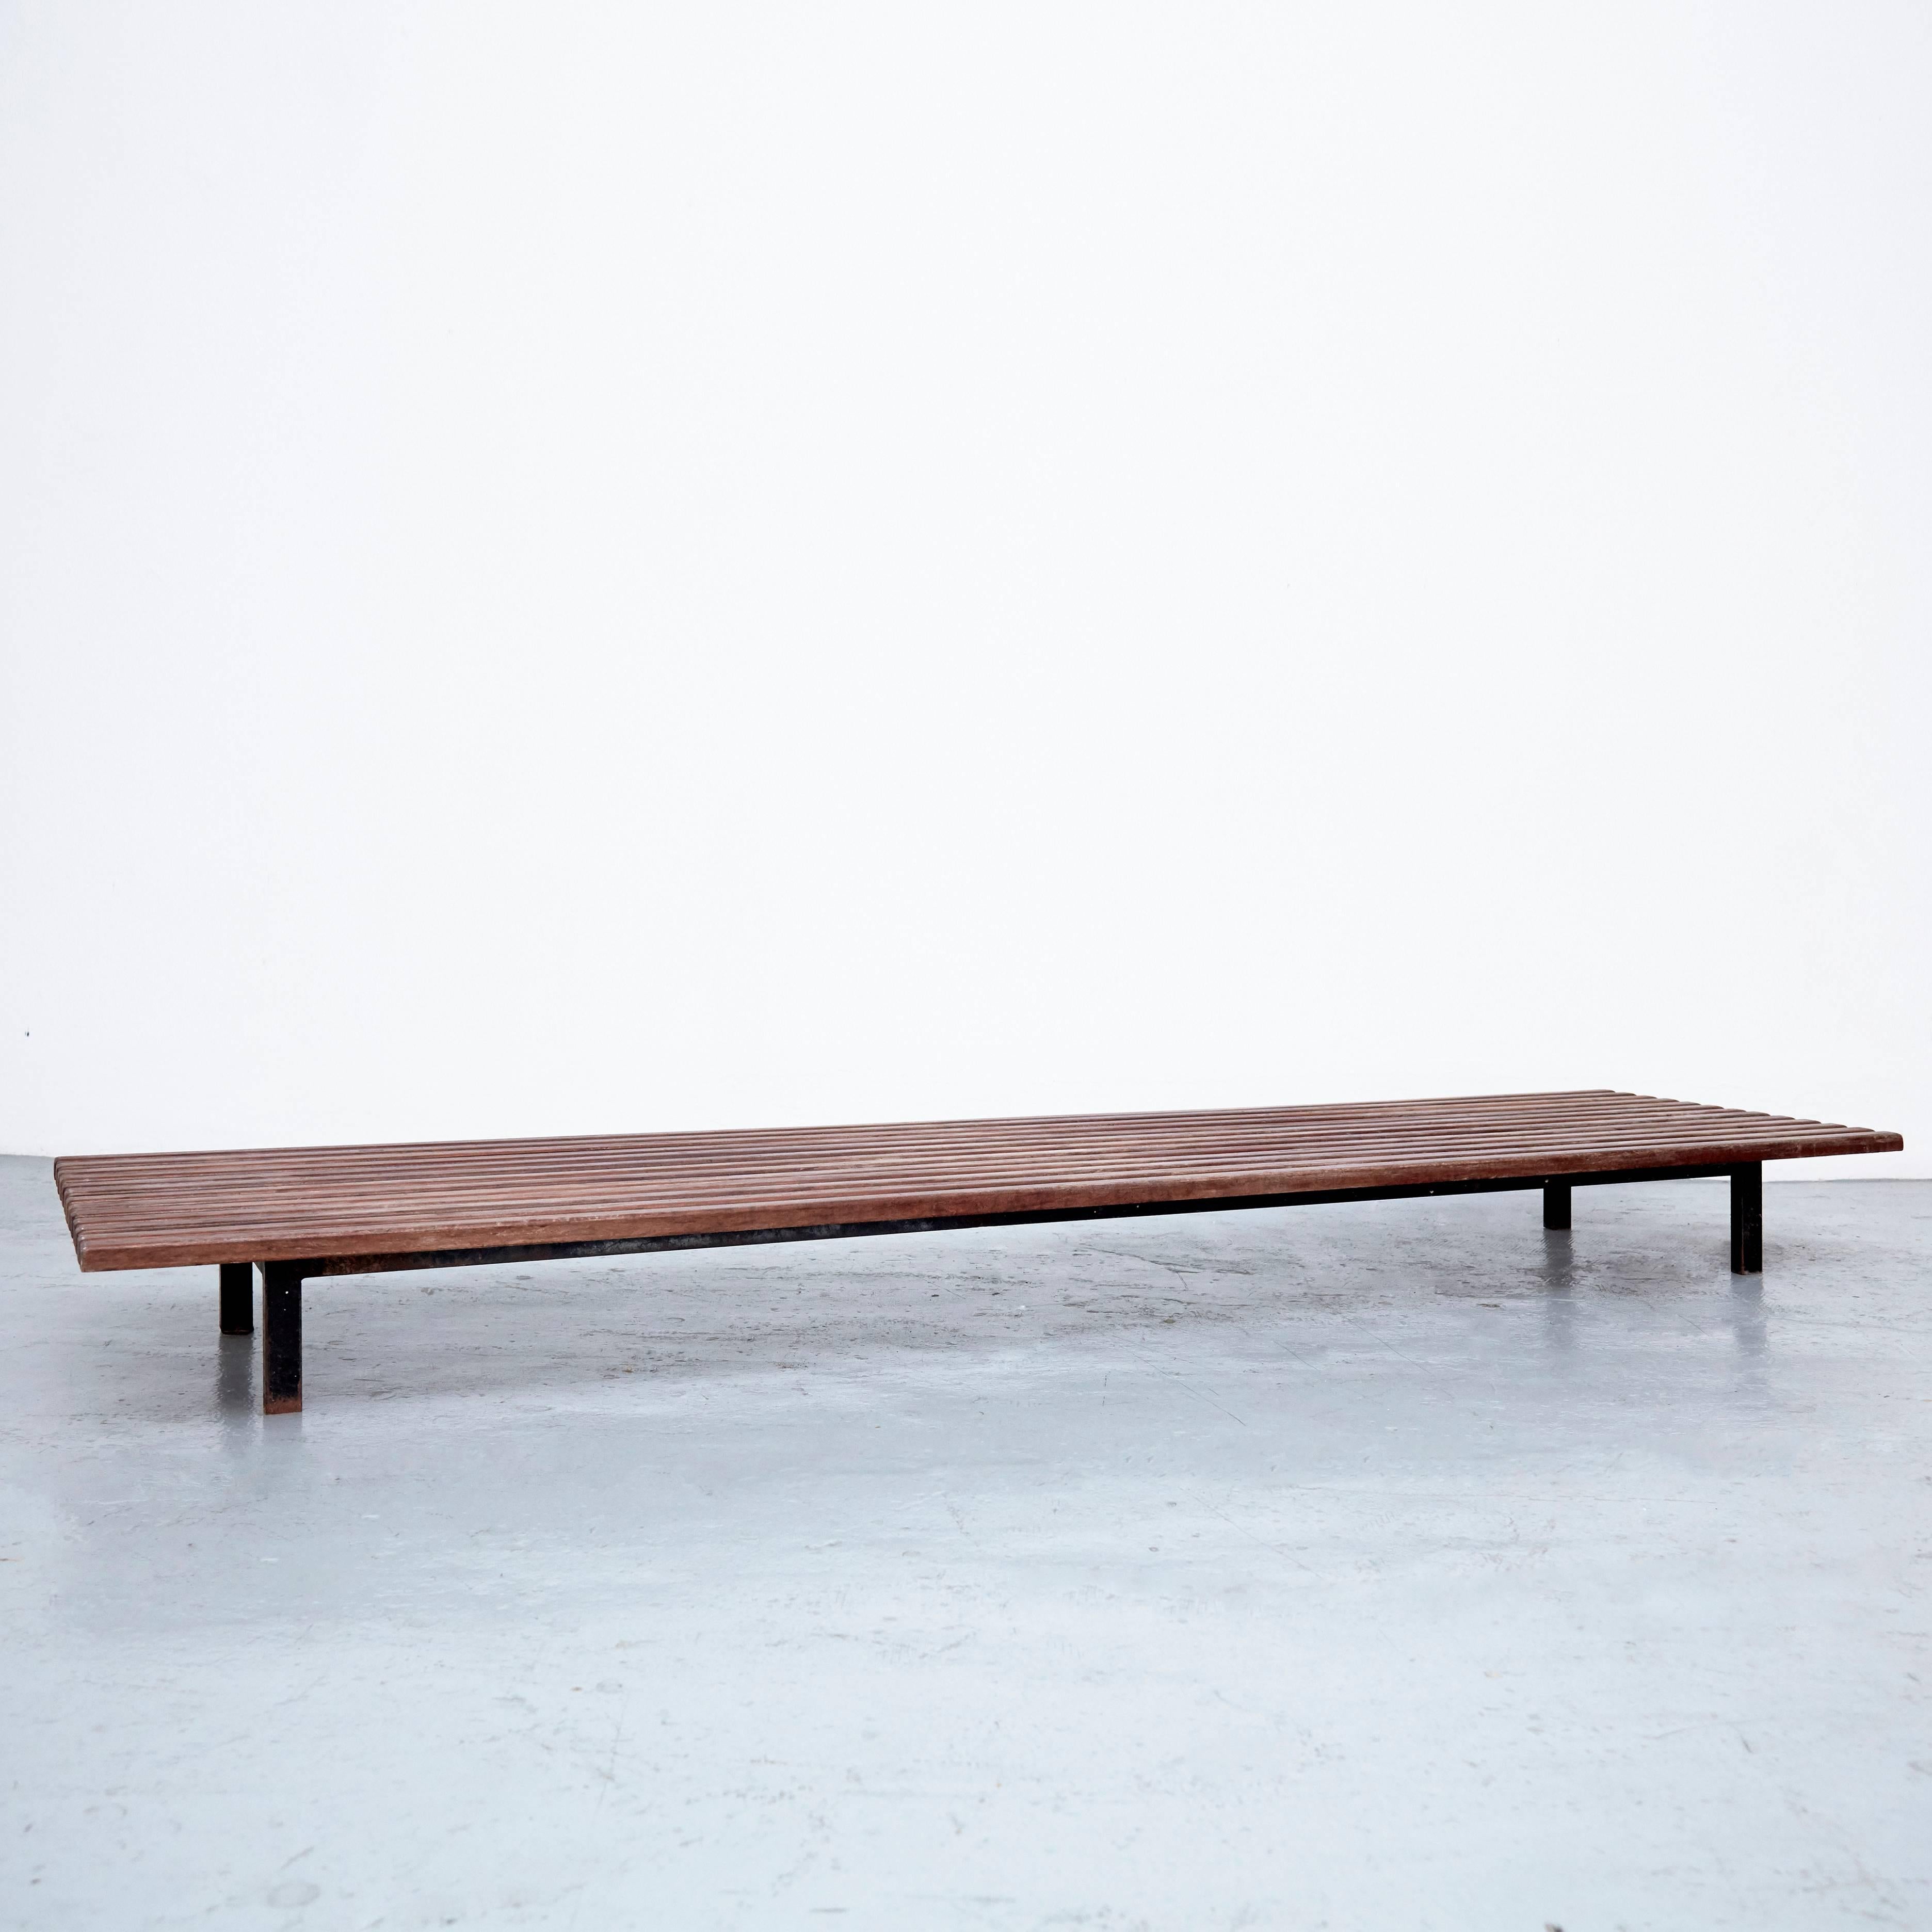 French Charlotte Perriand Mid Century Modern Wood And Metal Cansado Bench, circa 1950